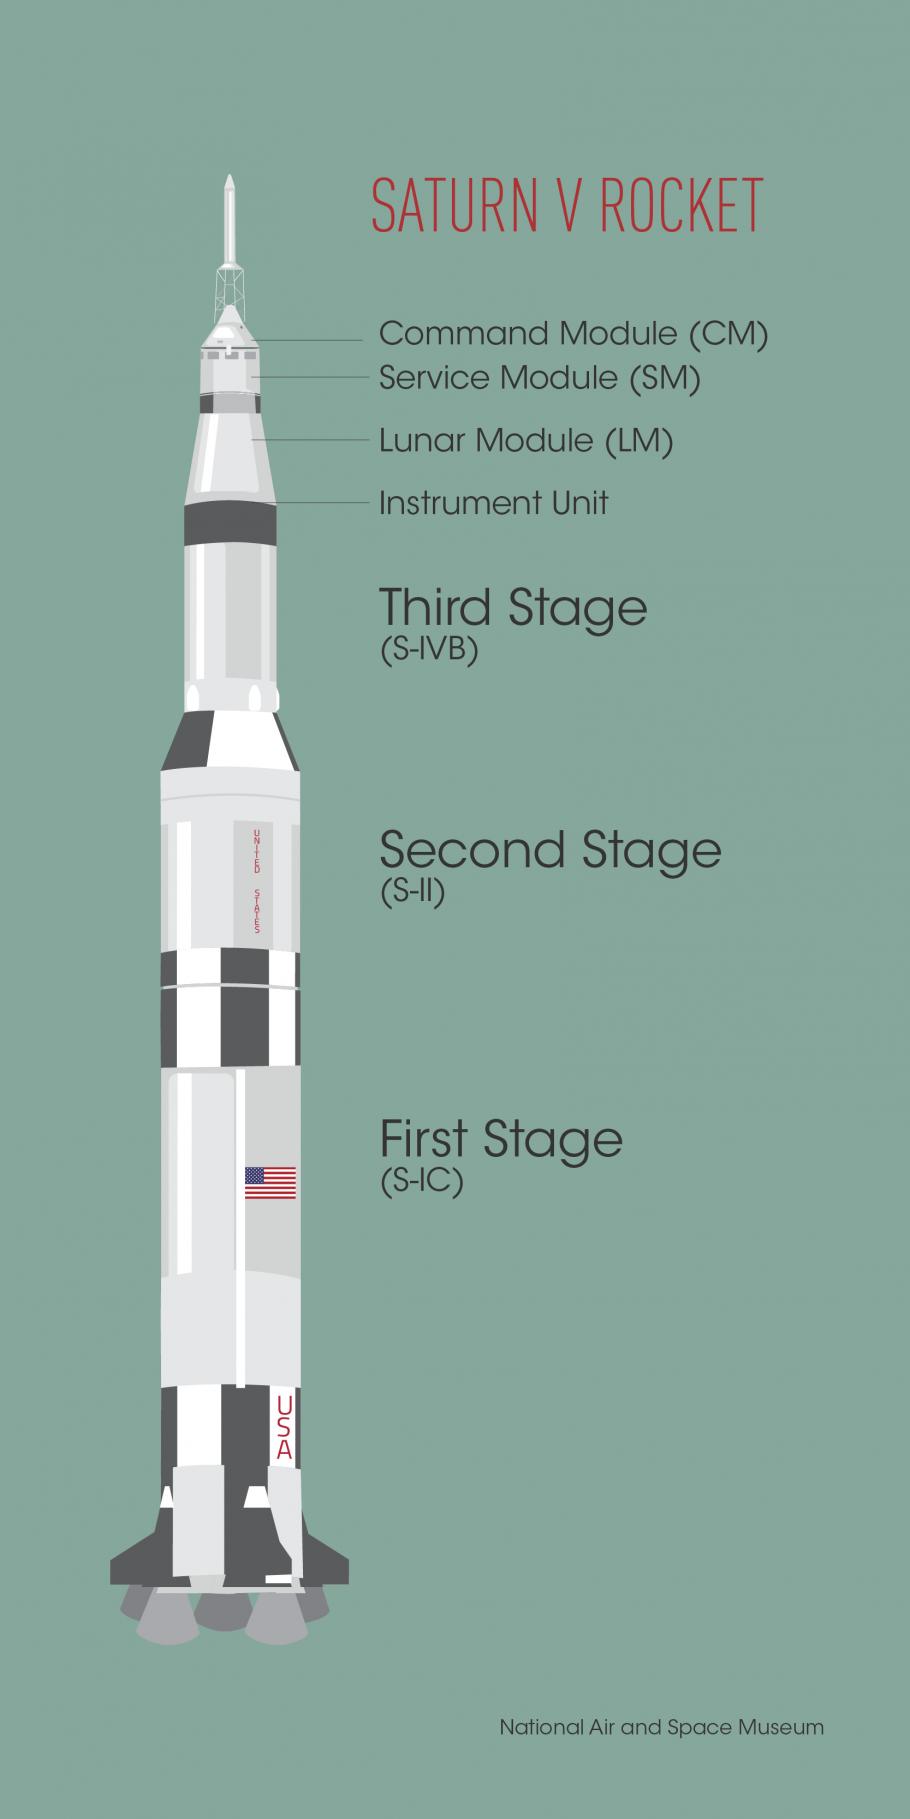 The components of the Saturn V rocket